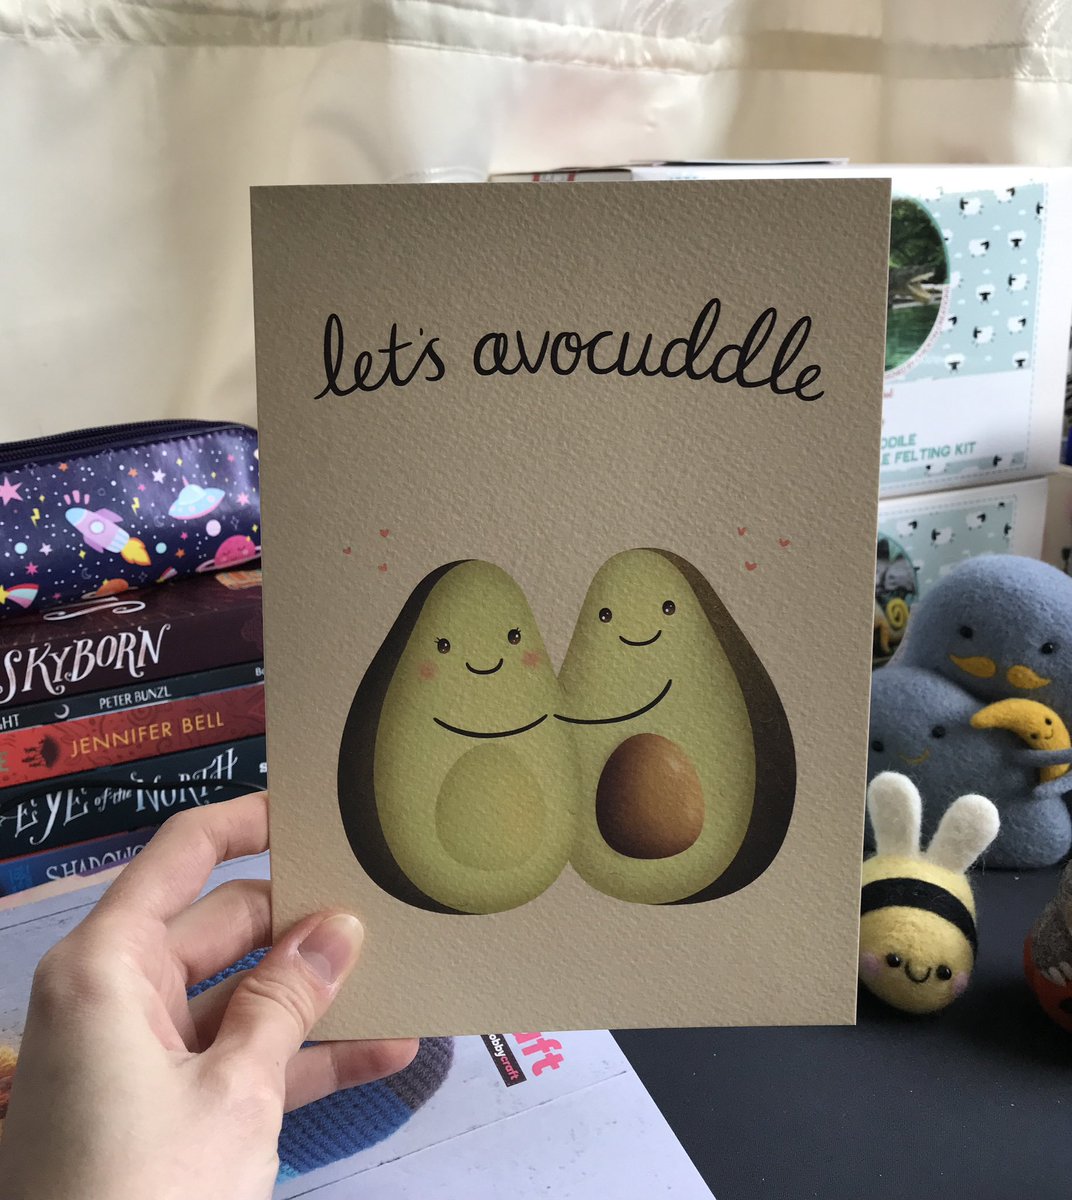 For day 6 of national stationery week ✏️ I’m popping in a free avocuddle card with every order just for today from my Etsy shop 😊
etsy.com/uk/shop/Mayblo…

#ukgiftam #ukgifthour #natstatweek #foodiegiftsday #shopsmall